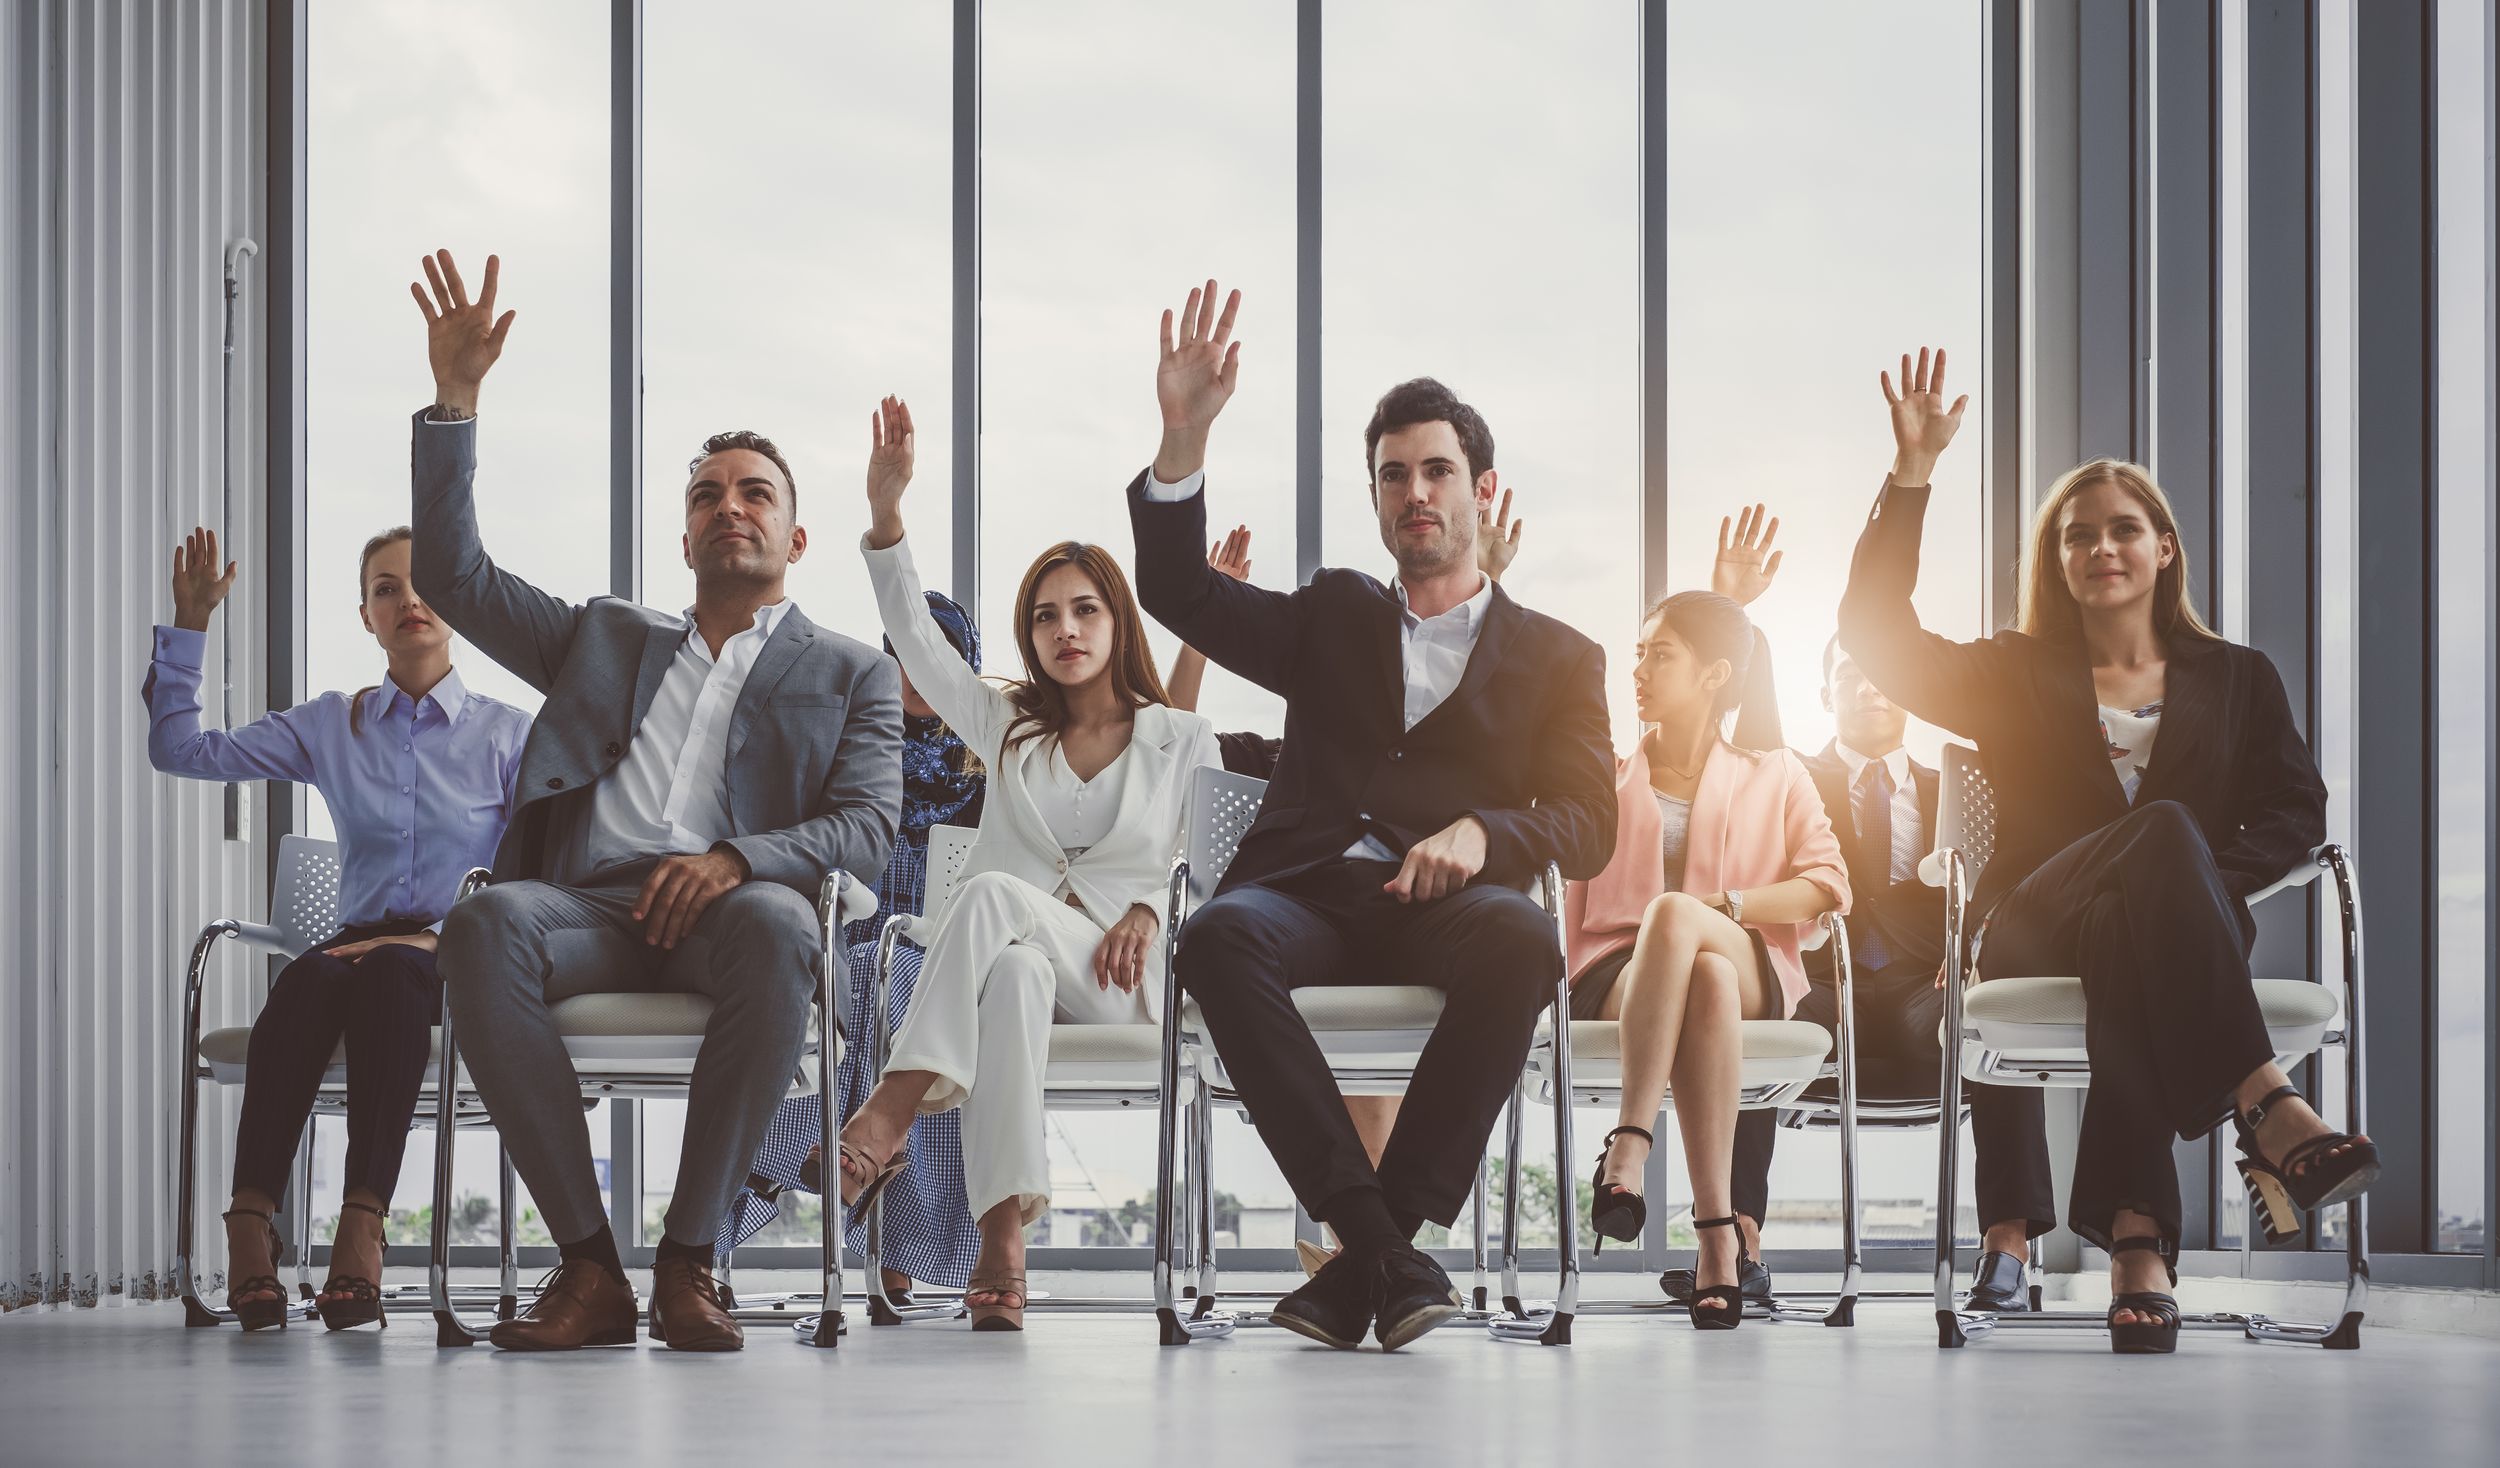 Group of business people raise hands up to agree with speaker in the meeting room